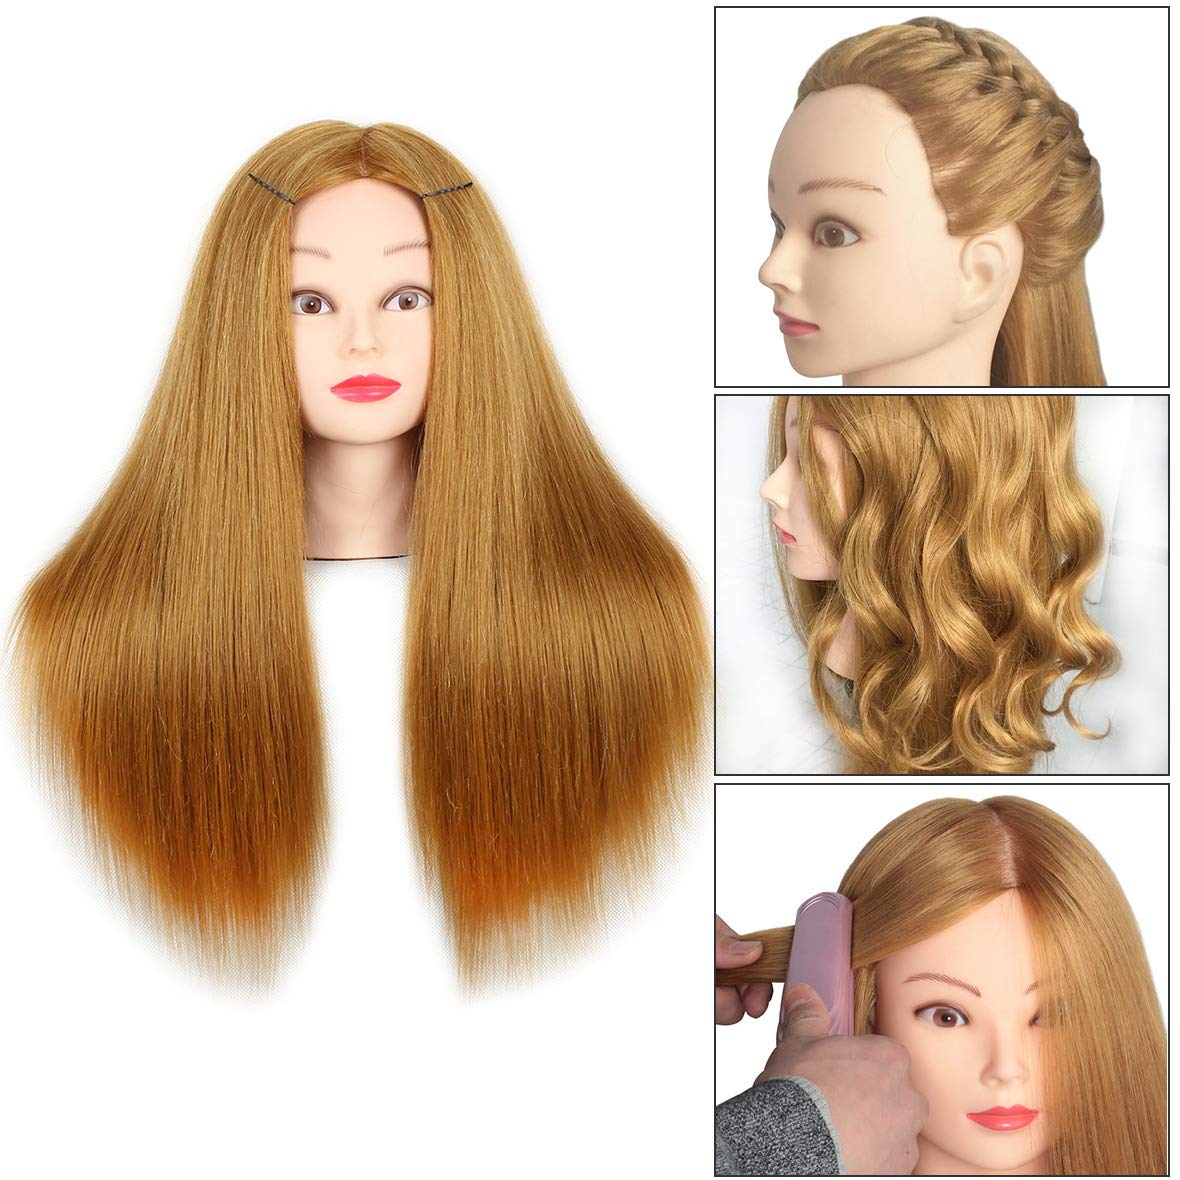 One Qty cosmetology mannequin head with human hair 100% human hair -11-12  tall